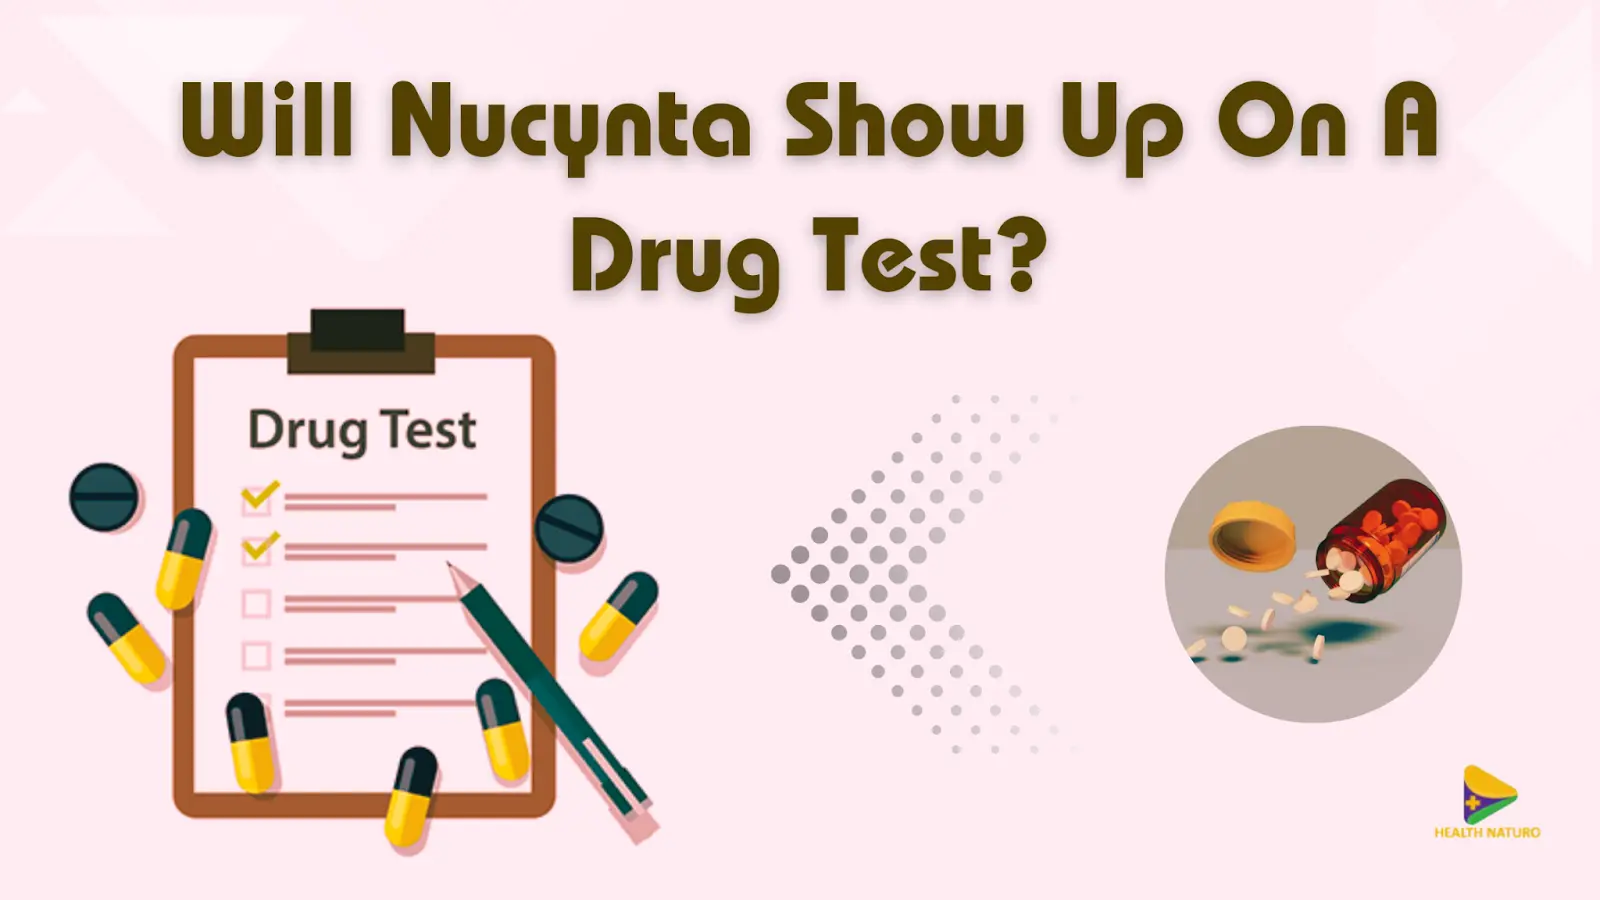 Does Nucynta Show Up On a Drug Test